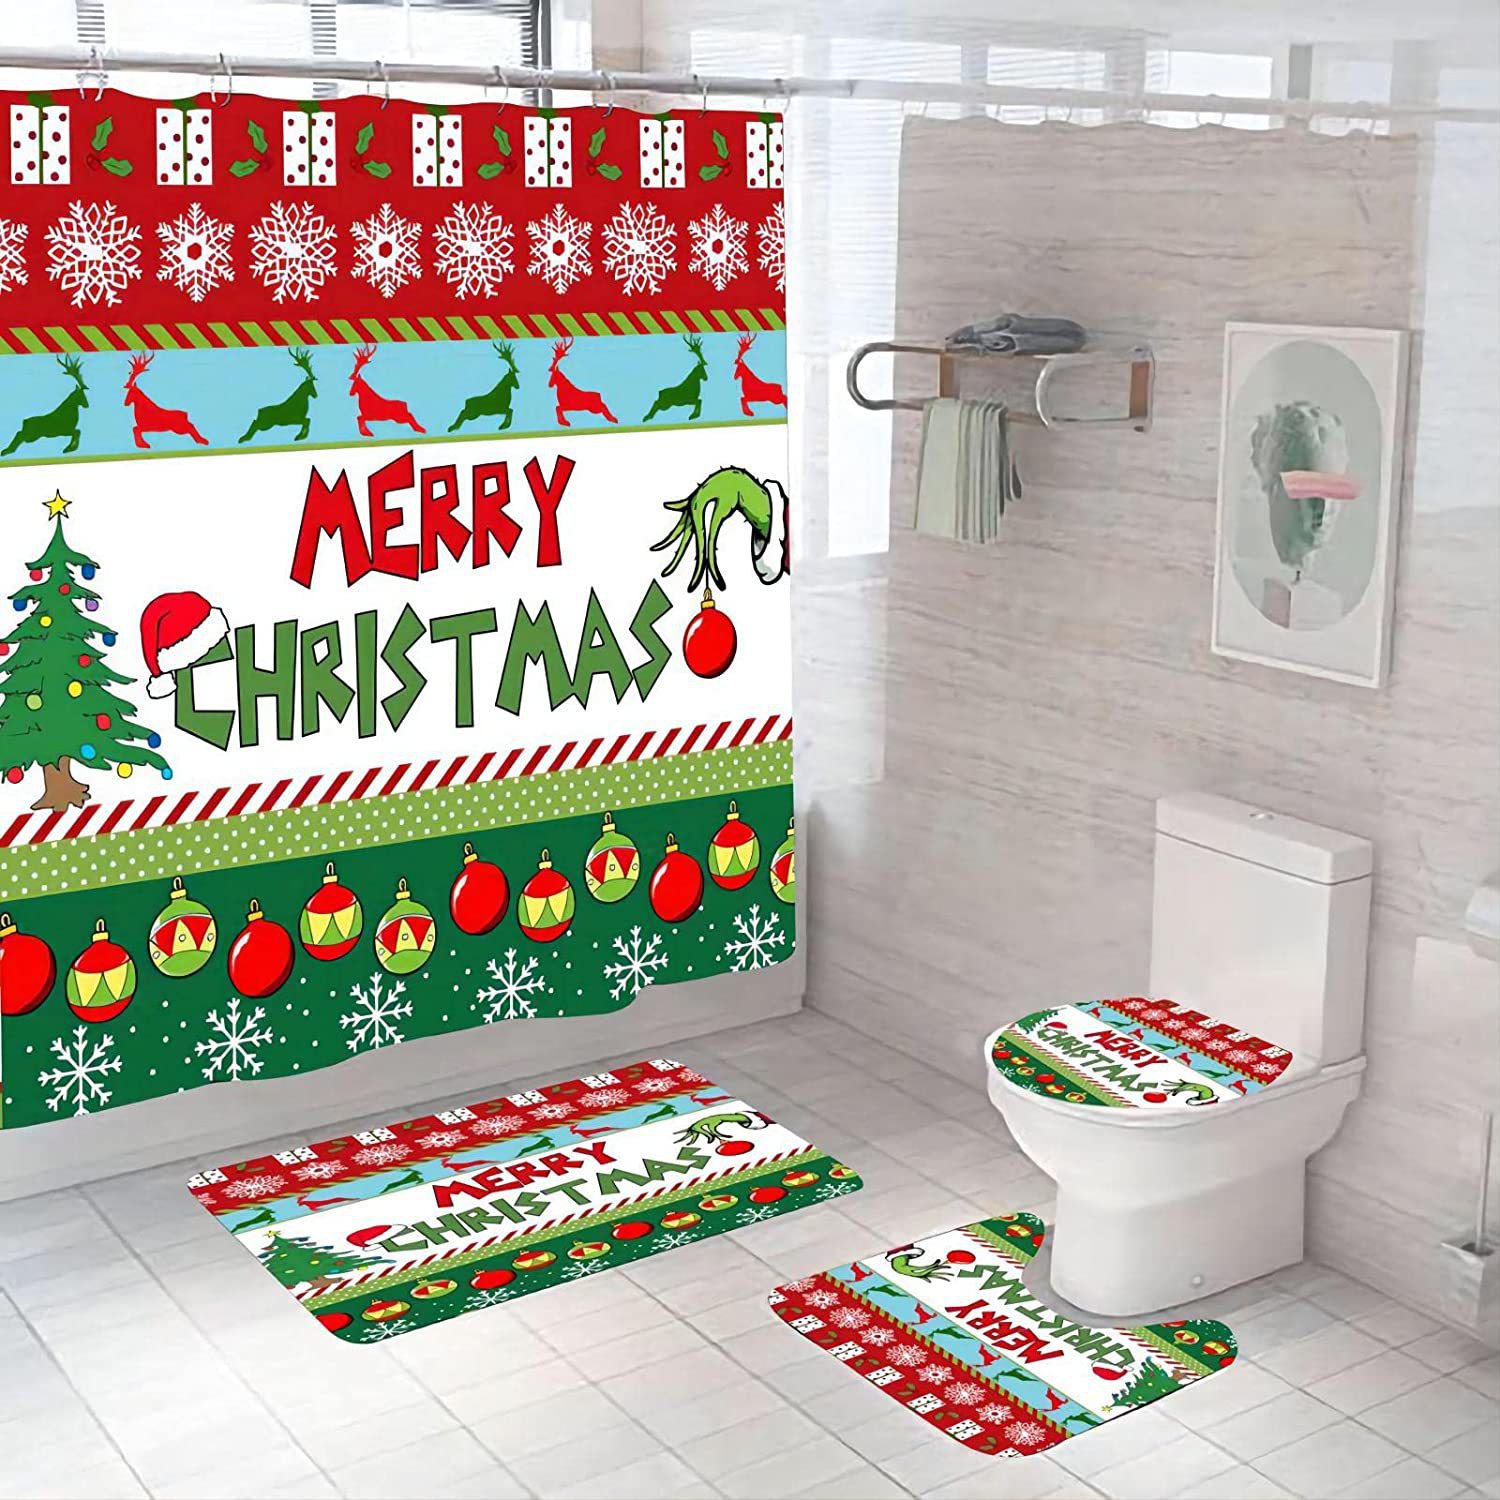 Christmas Grinch 3D Digital Printing Home Decoration Jingling Bell Bathroom Waterproof Four-Piece Set Shower Curtain Cloth Shower Curtain